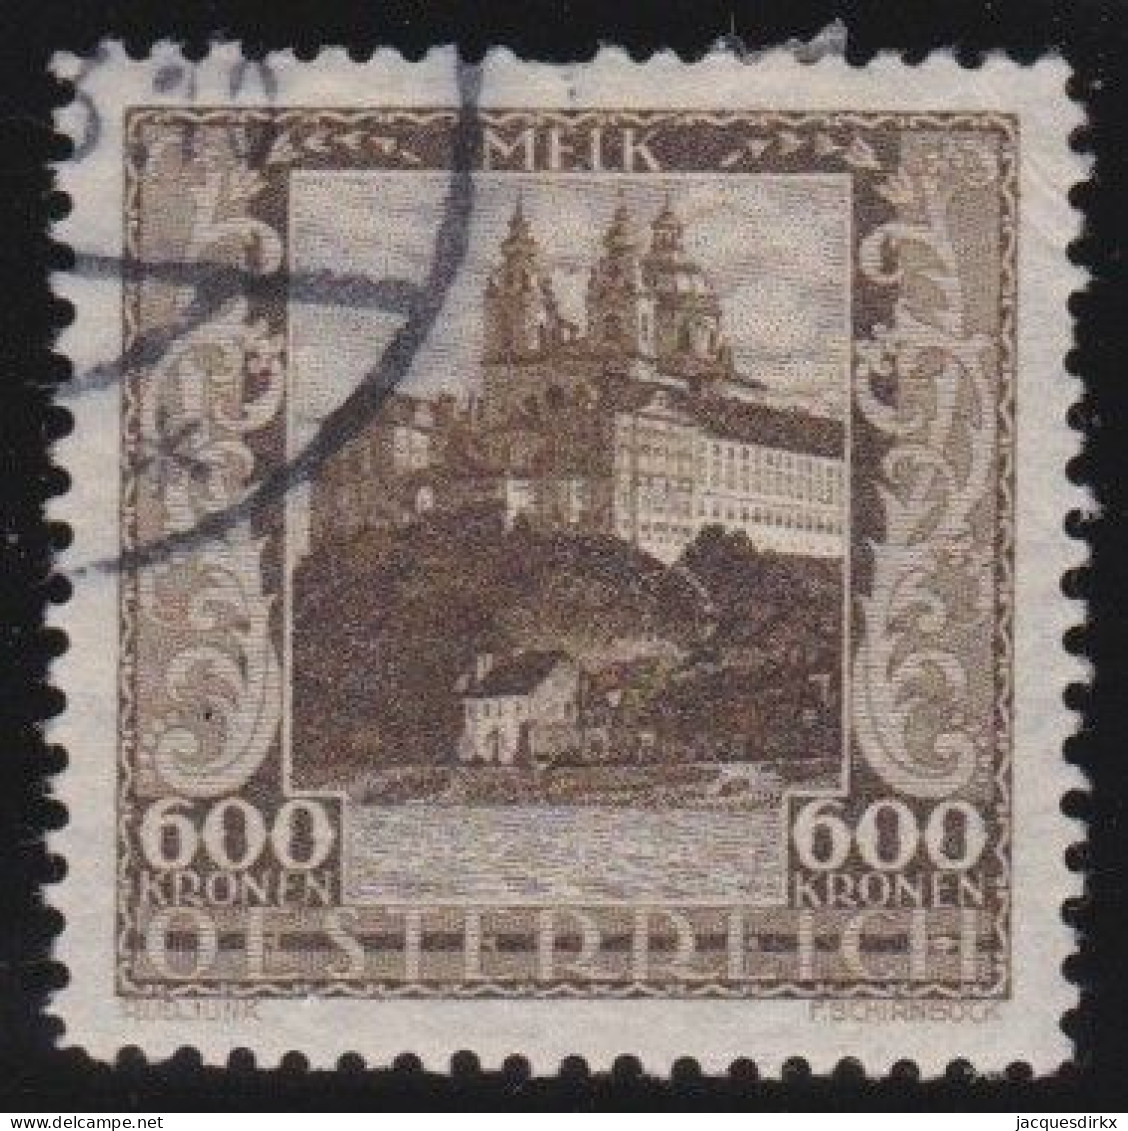 Österreich   .    Y&T    .   311   .   O    .    Gestempelt - Used Stamps